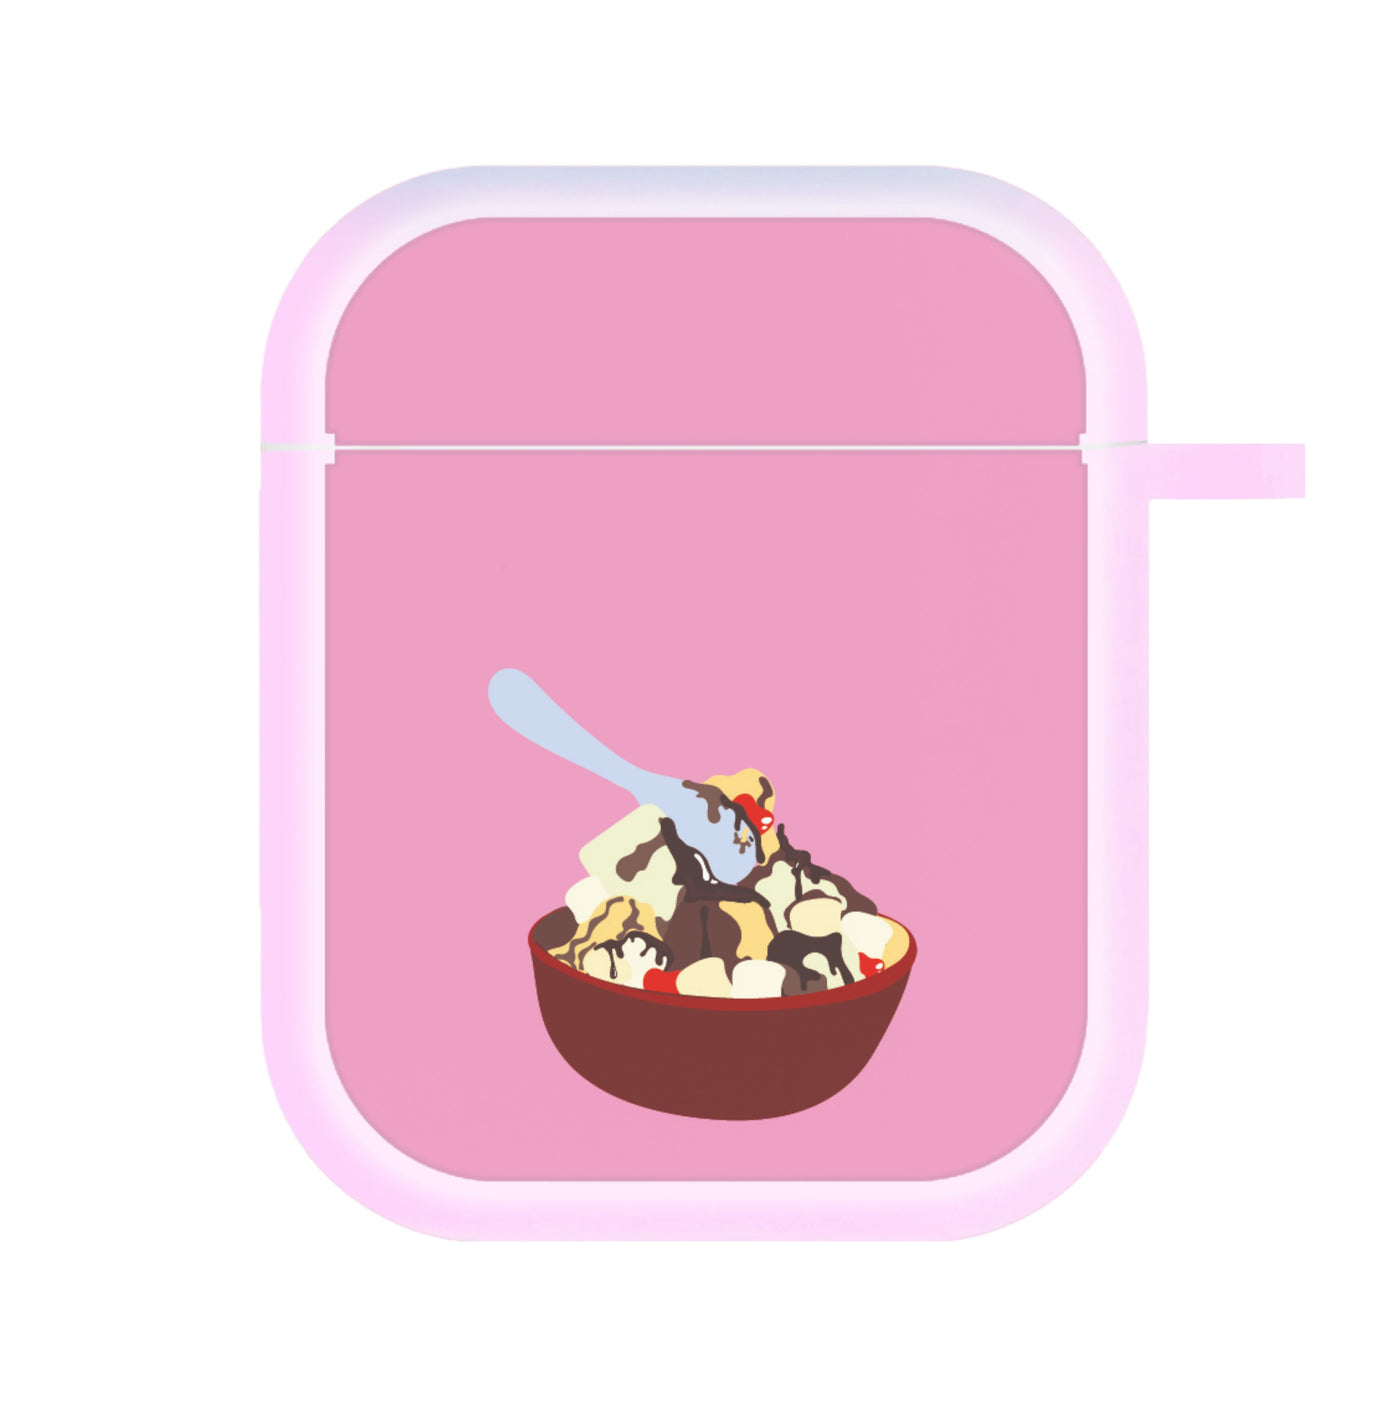 Bowl Of Ice Cream - Home Alone AirPods Case